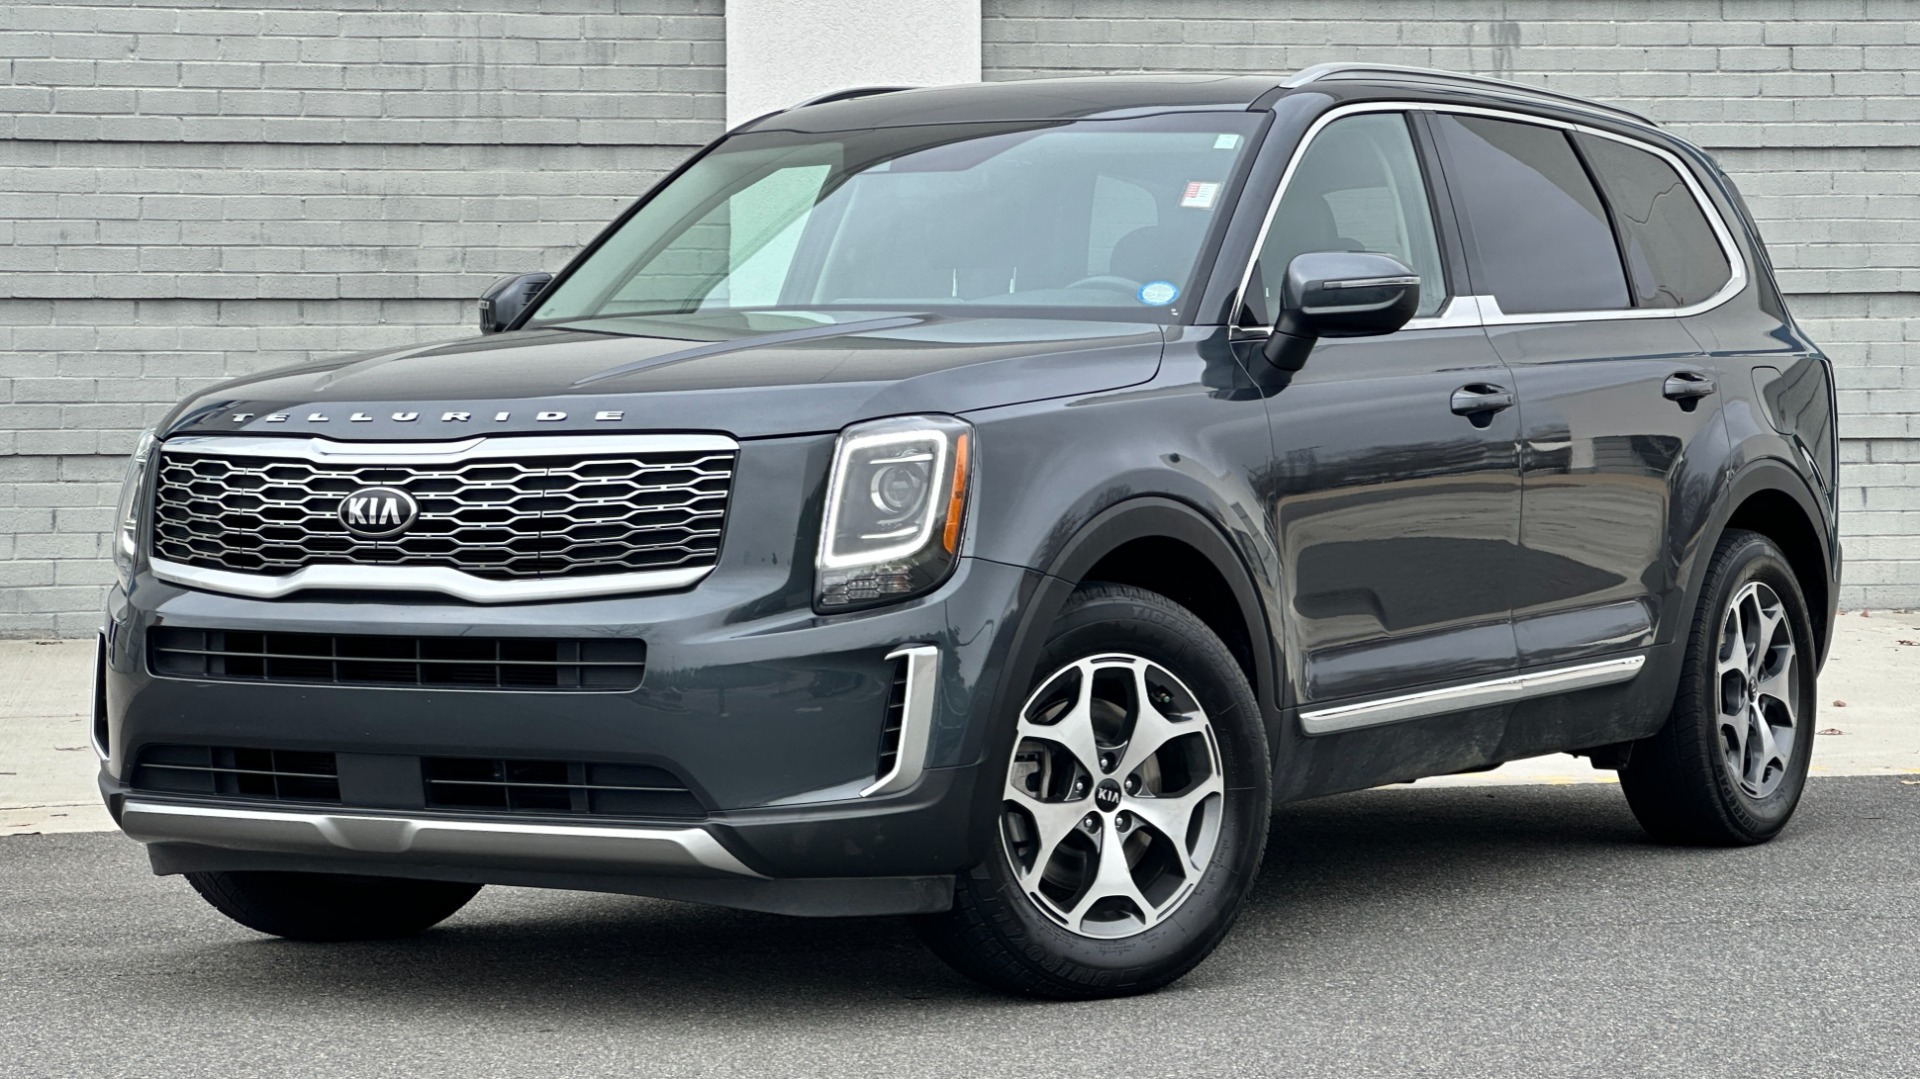 Used 2020 Kia Telluride EX / DRIVER ASSIST / LEATHER / V6 / APPLE CARPLAY / REARVIEW / 3 ROW for sale Sold at Formula Imports in Charlotte NC 28227 1